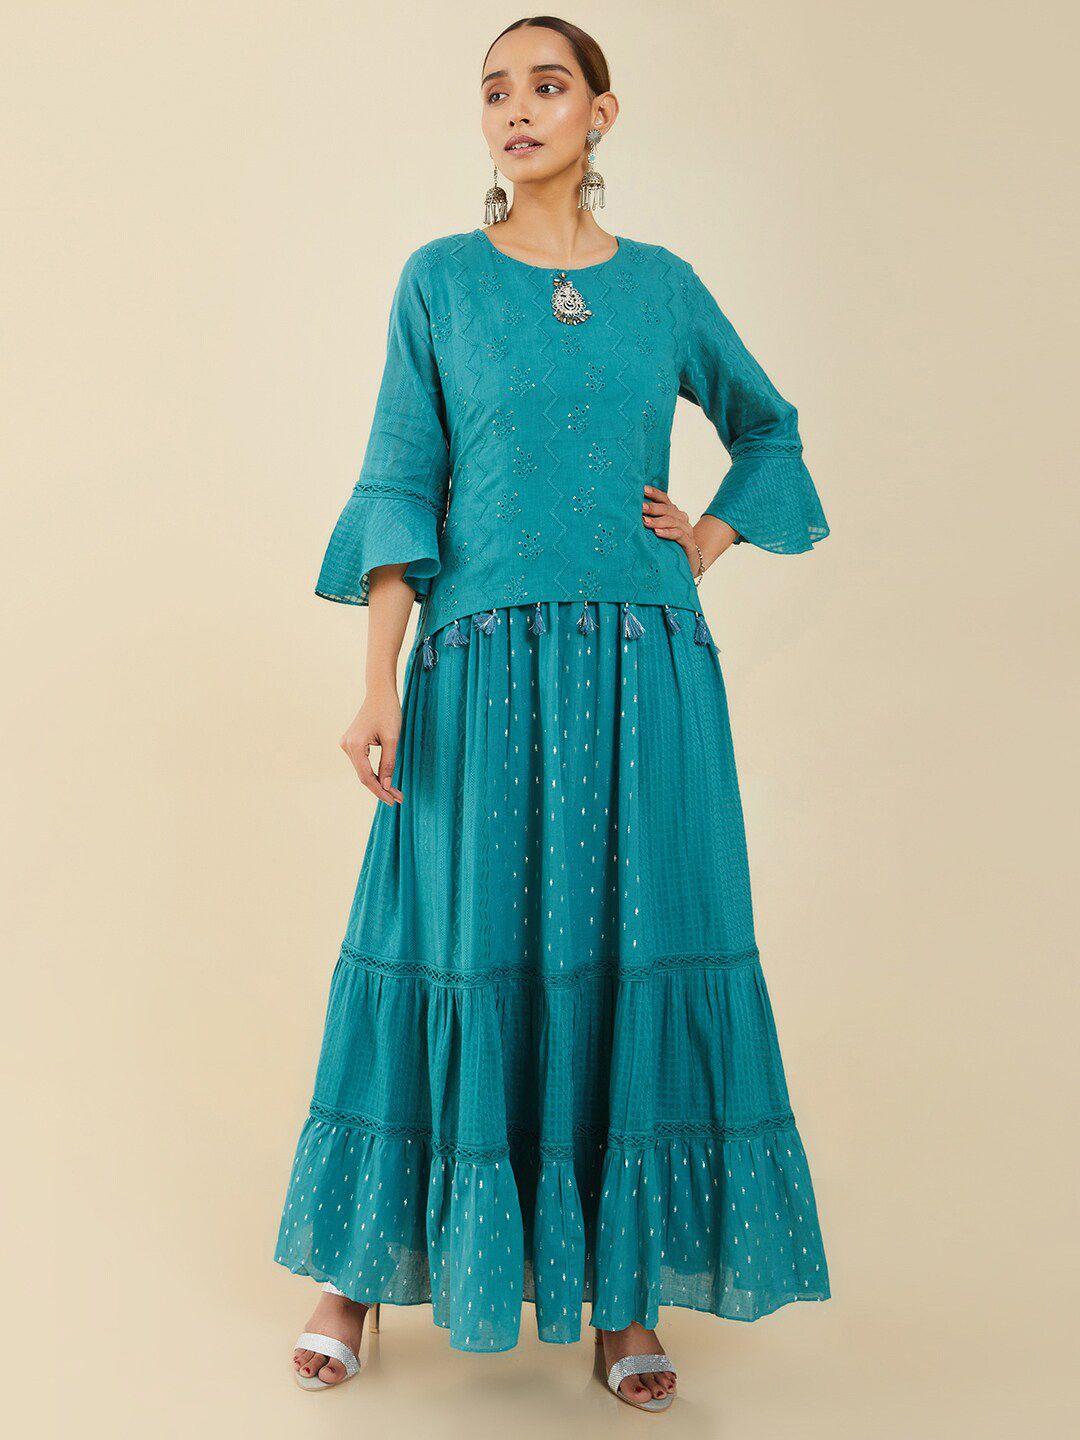 soch teal embroidered ethnic maxi dress